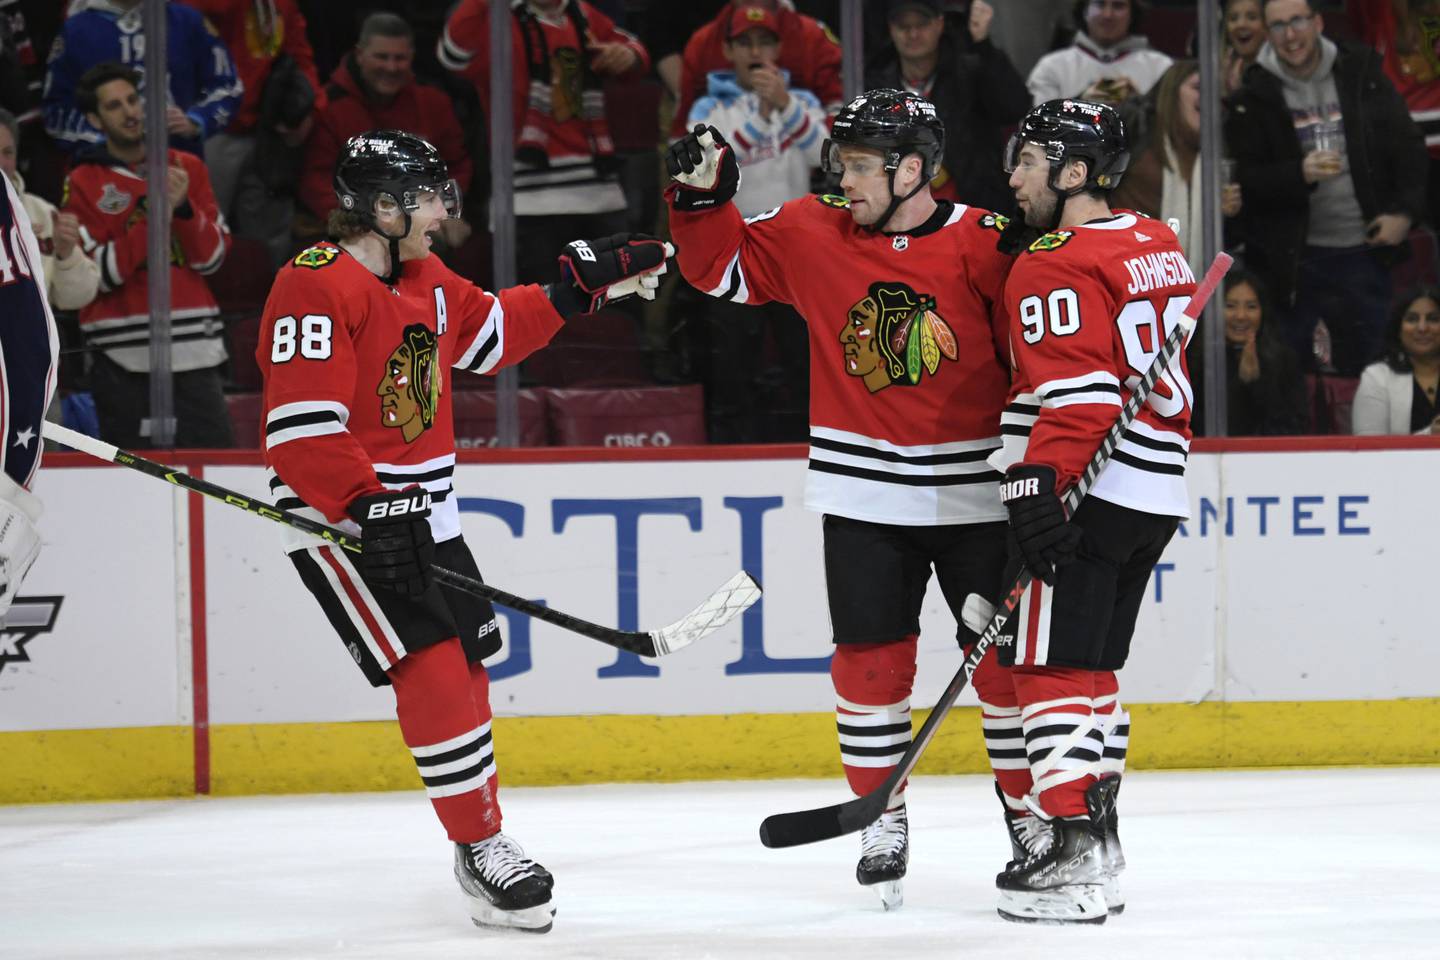 Max Domi (13) celebrates with Patrick Kane (88) and Tyler Johnson (90) after scoring against the Blue Jackets during the first period on Dec. 23, 2022.